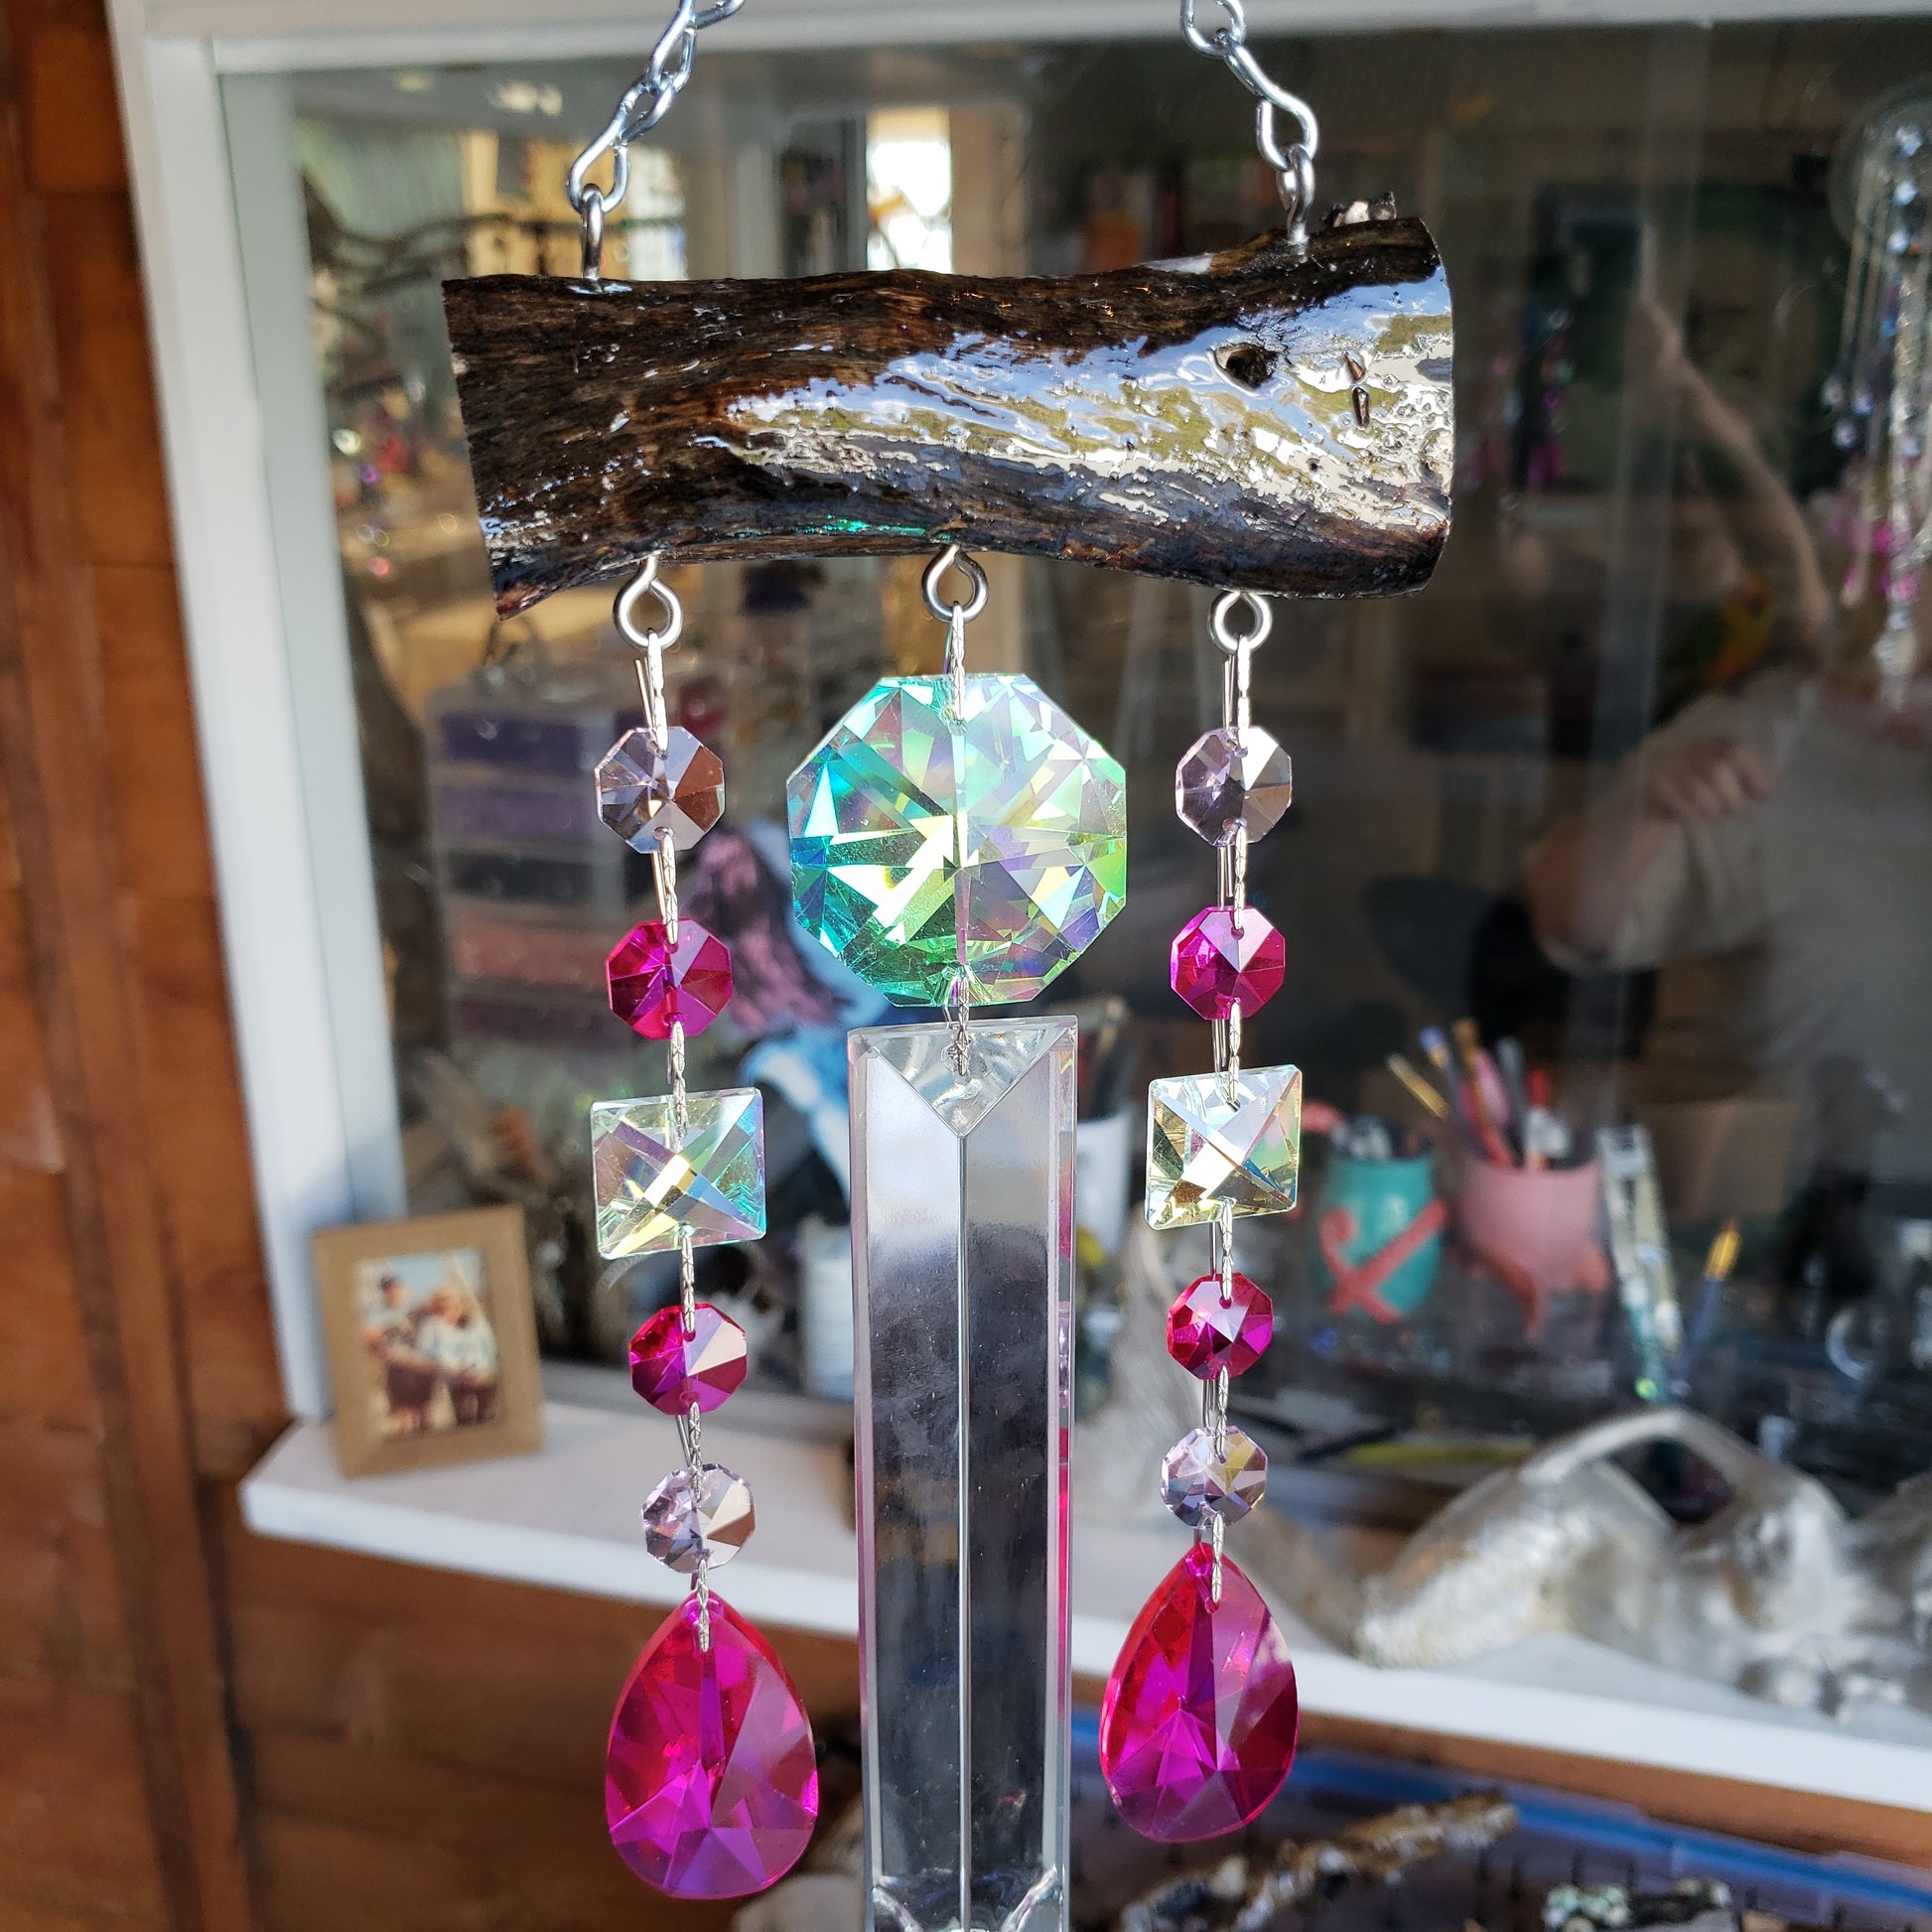 epoxy resin driftwood wind-chime hand made art 